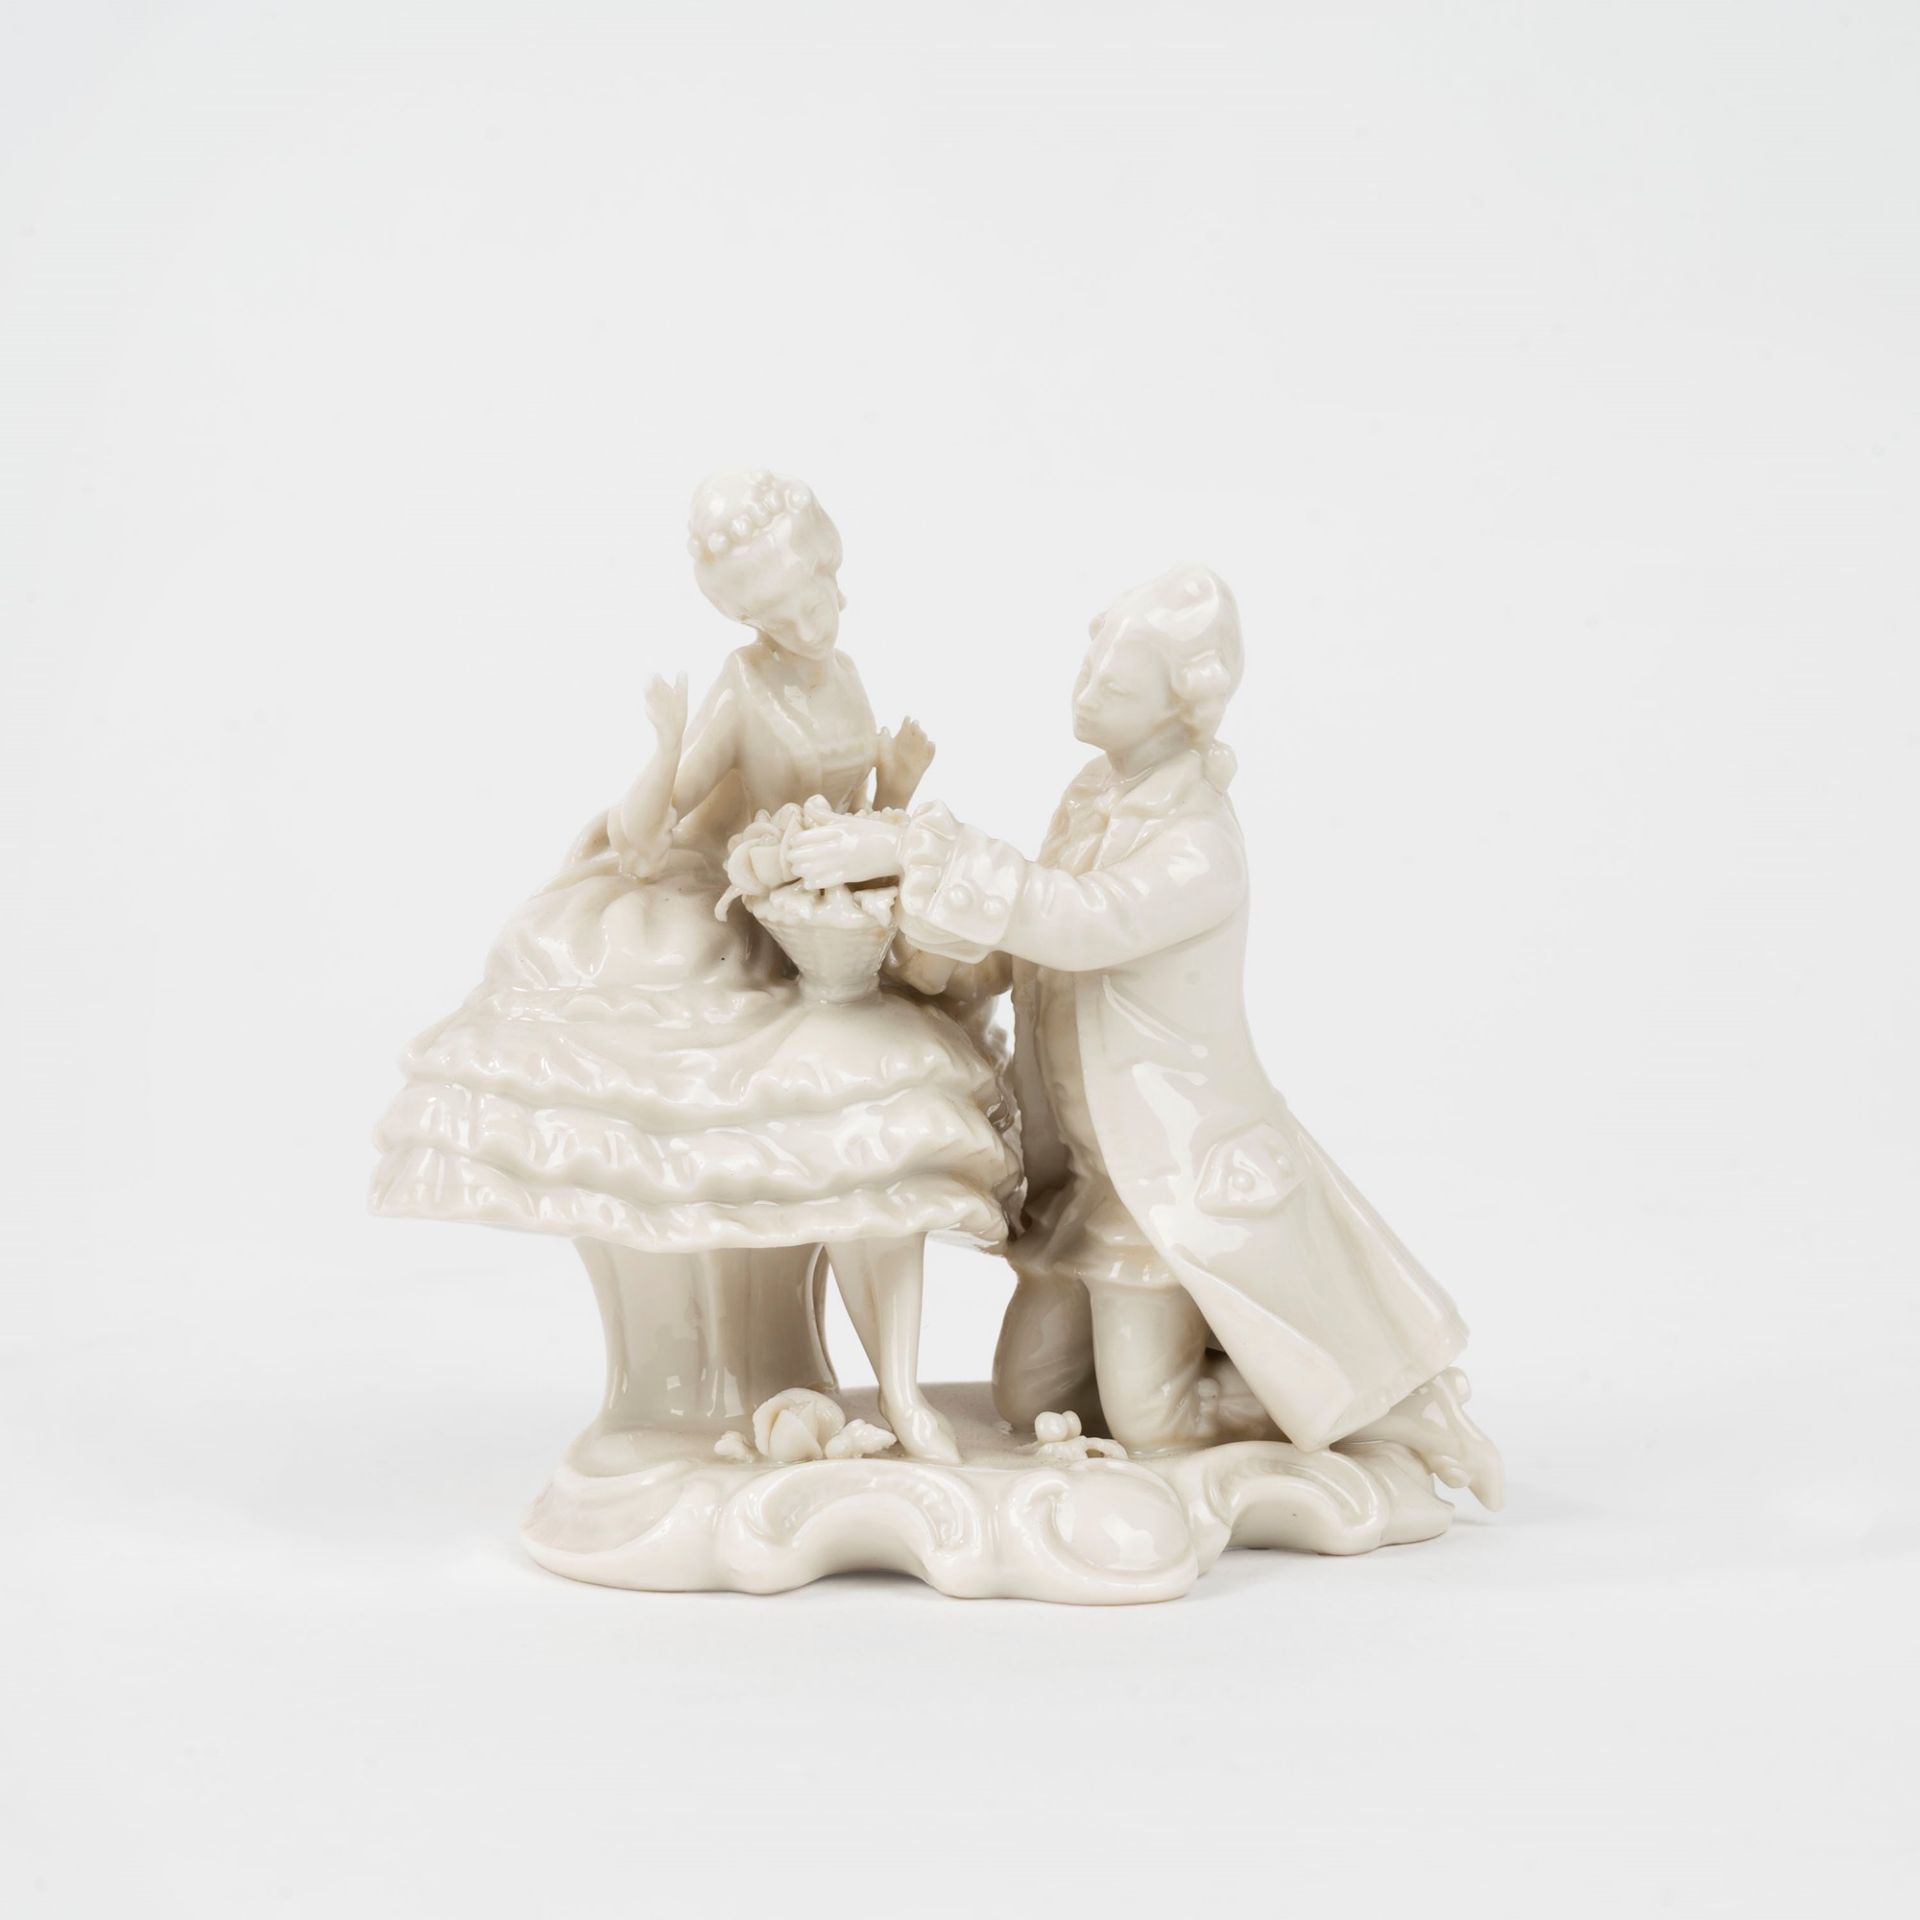 Lot consisting of seven white porcelain sculptures, 20th century - Image 7 of 10